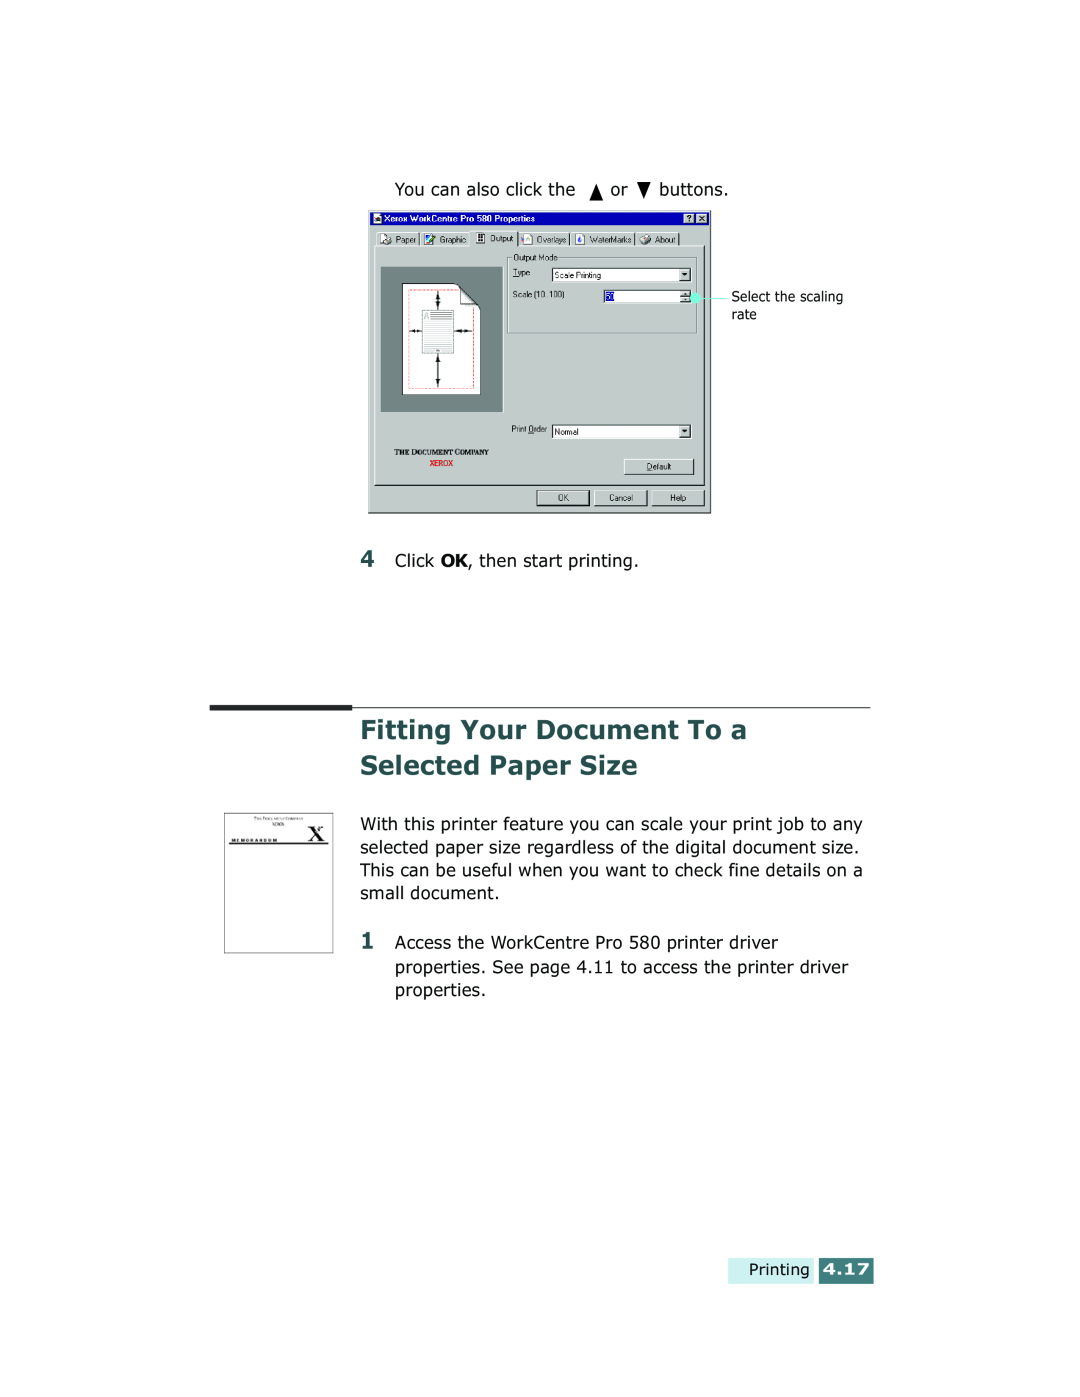 Xerox Pro 580 manual Fitting Your Document To a Selected Paper Size 